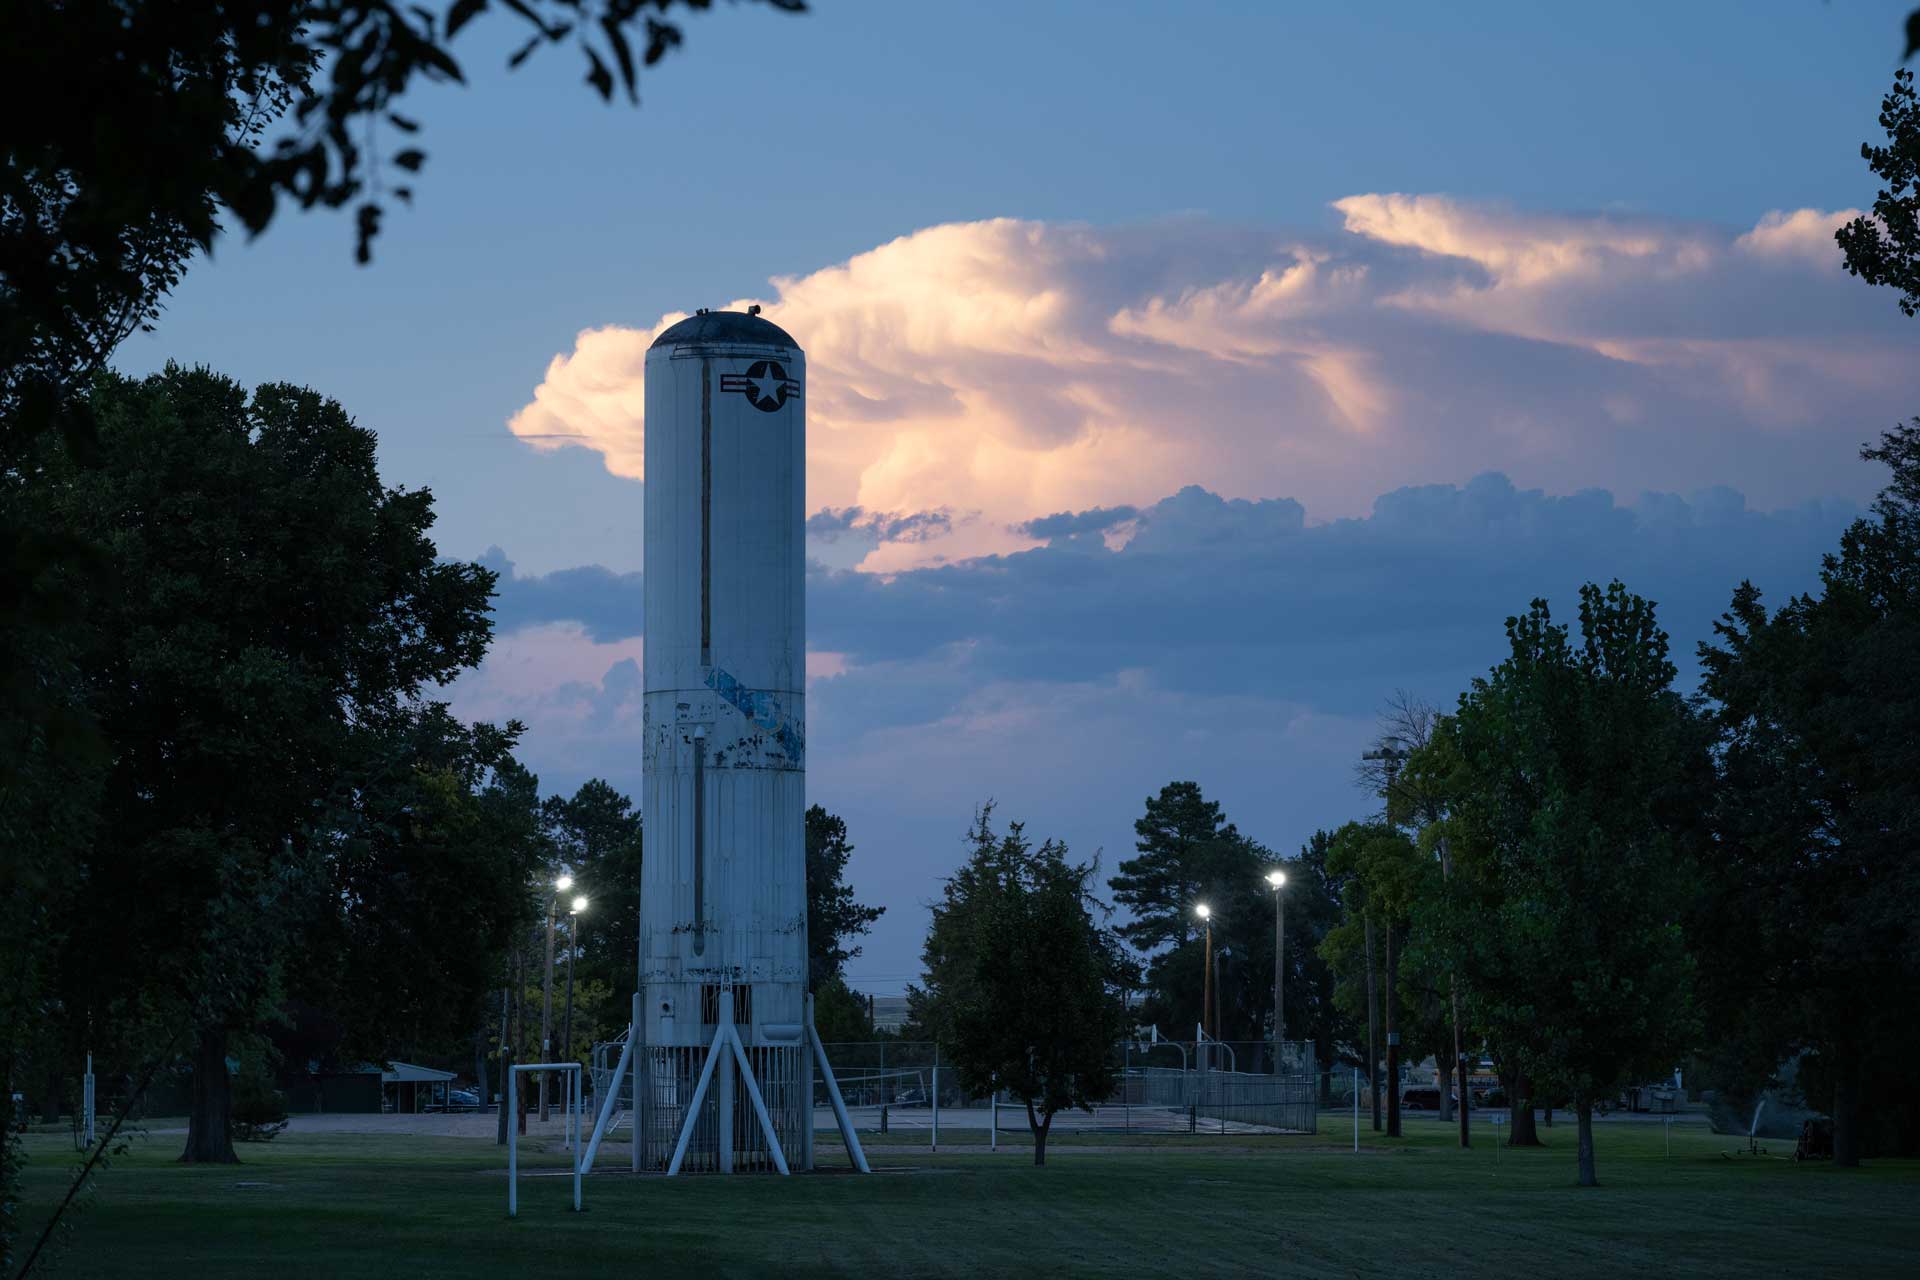 A decommissioned Titan I land-based nuclear missile stands in a park in Kimball, NE. The city is known as “Missile Center USA.” Erected in 1968, the deteriorating missile was removed in September 2023 because it had become a public hazard. (Photo by Nina Berman).